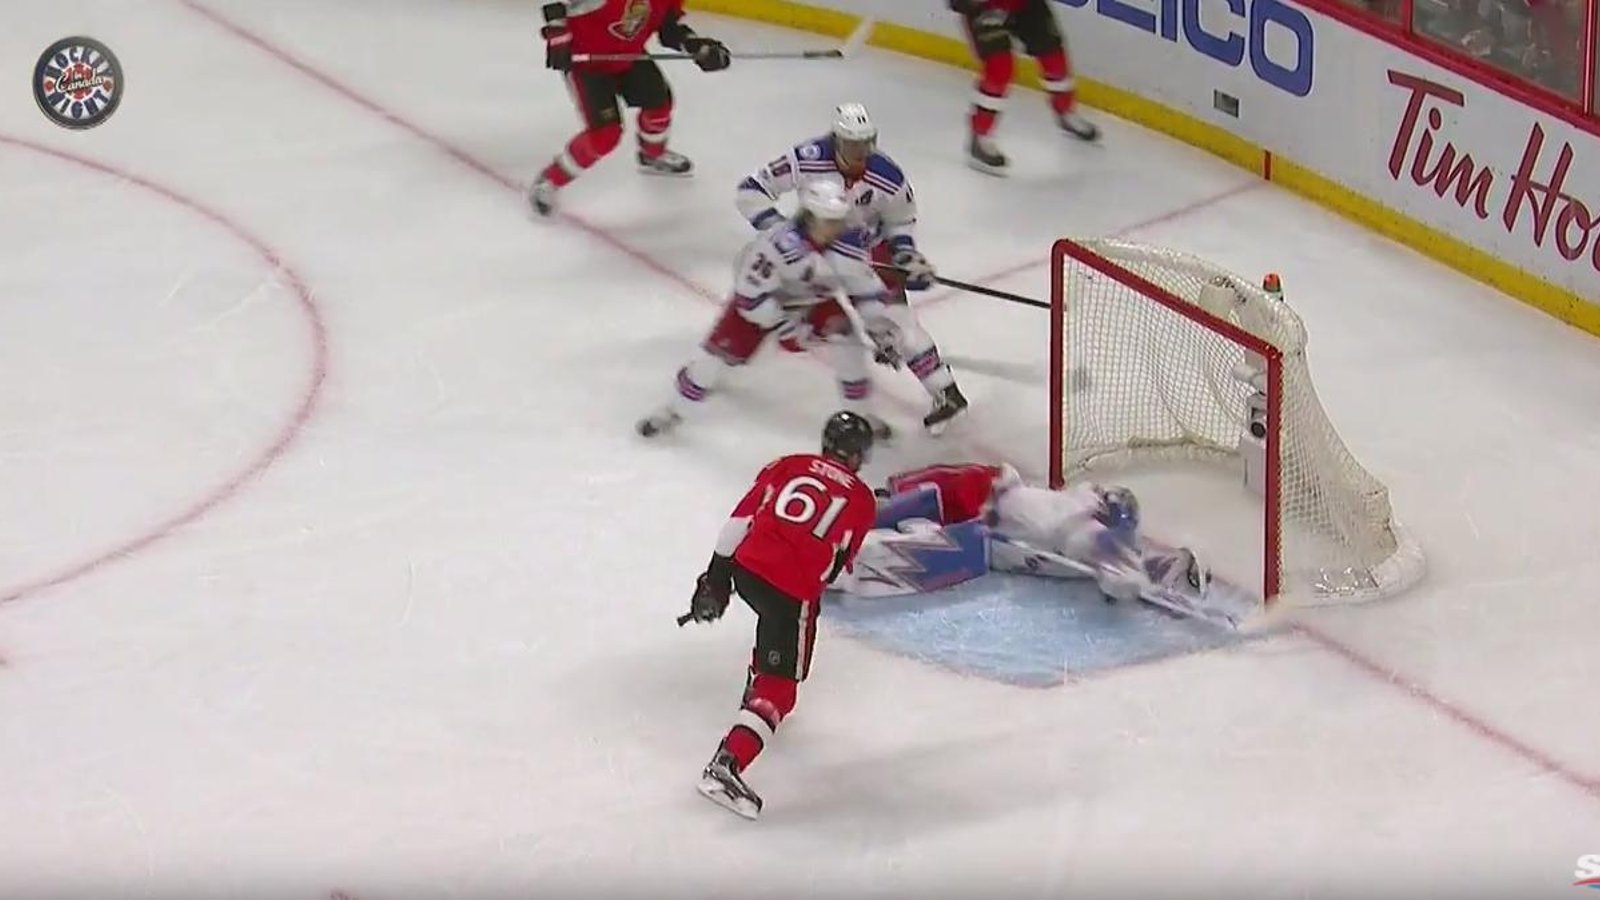 Lundqvist with the absolute steal on Stone! 